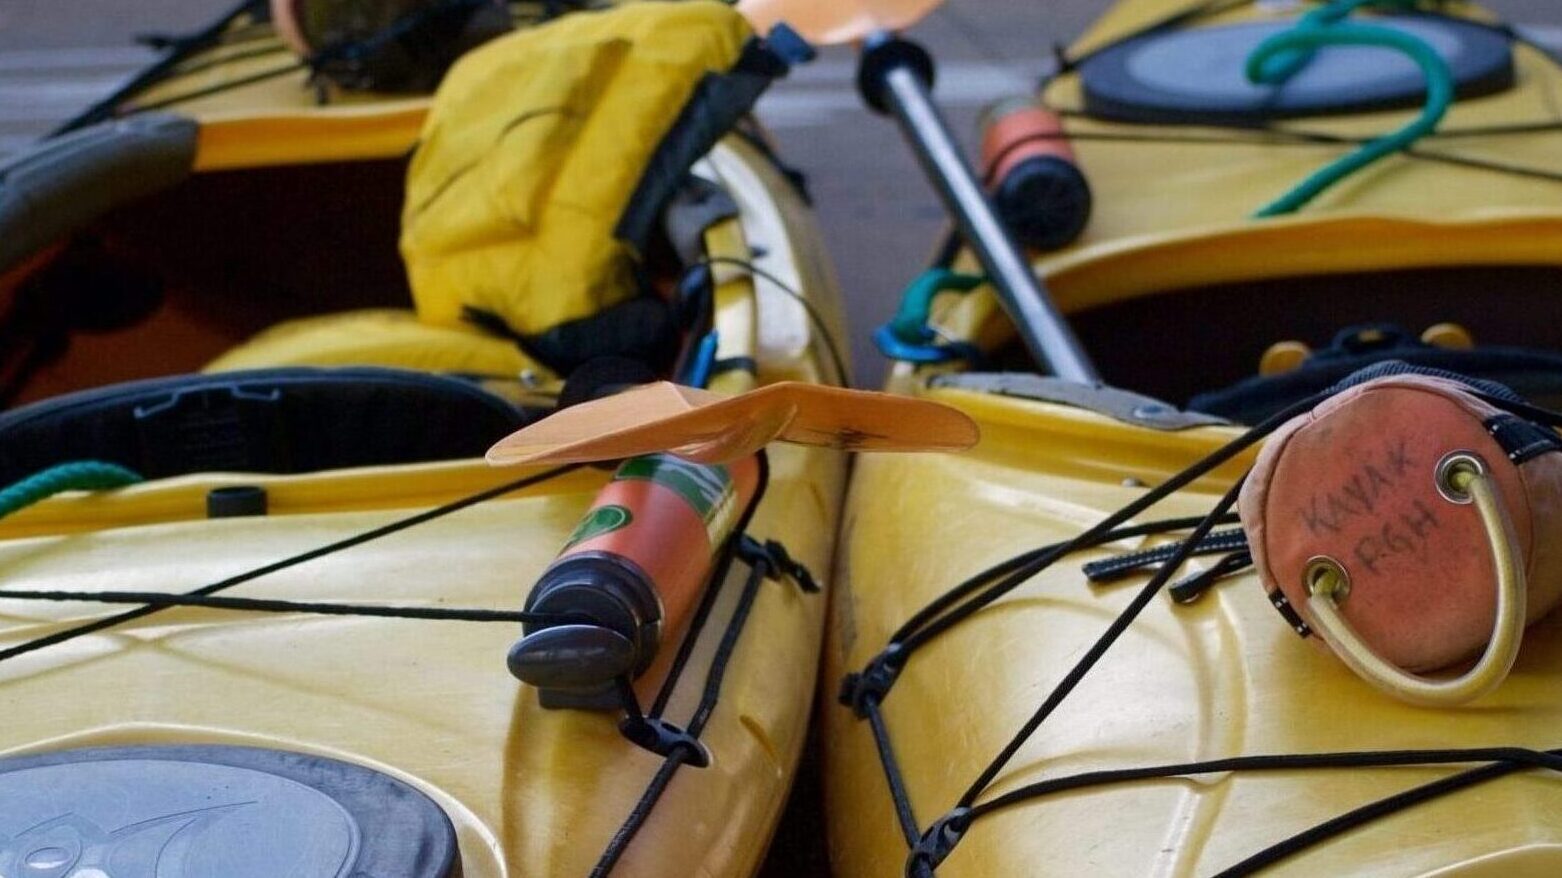 Two yellow kayaks fitted with various rescue gear including a bilge pump and throw bag.